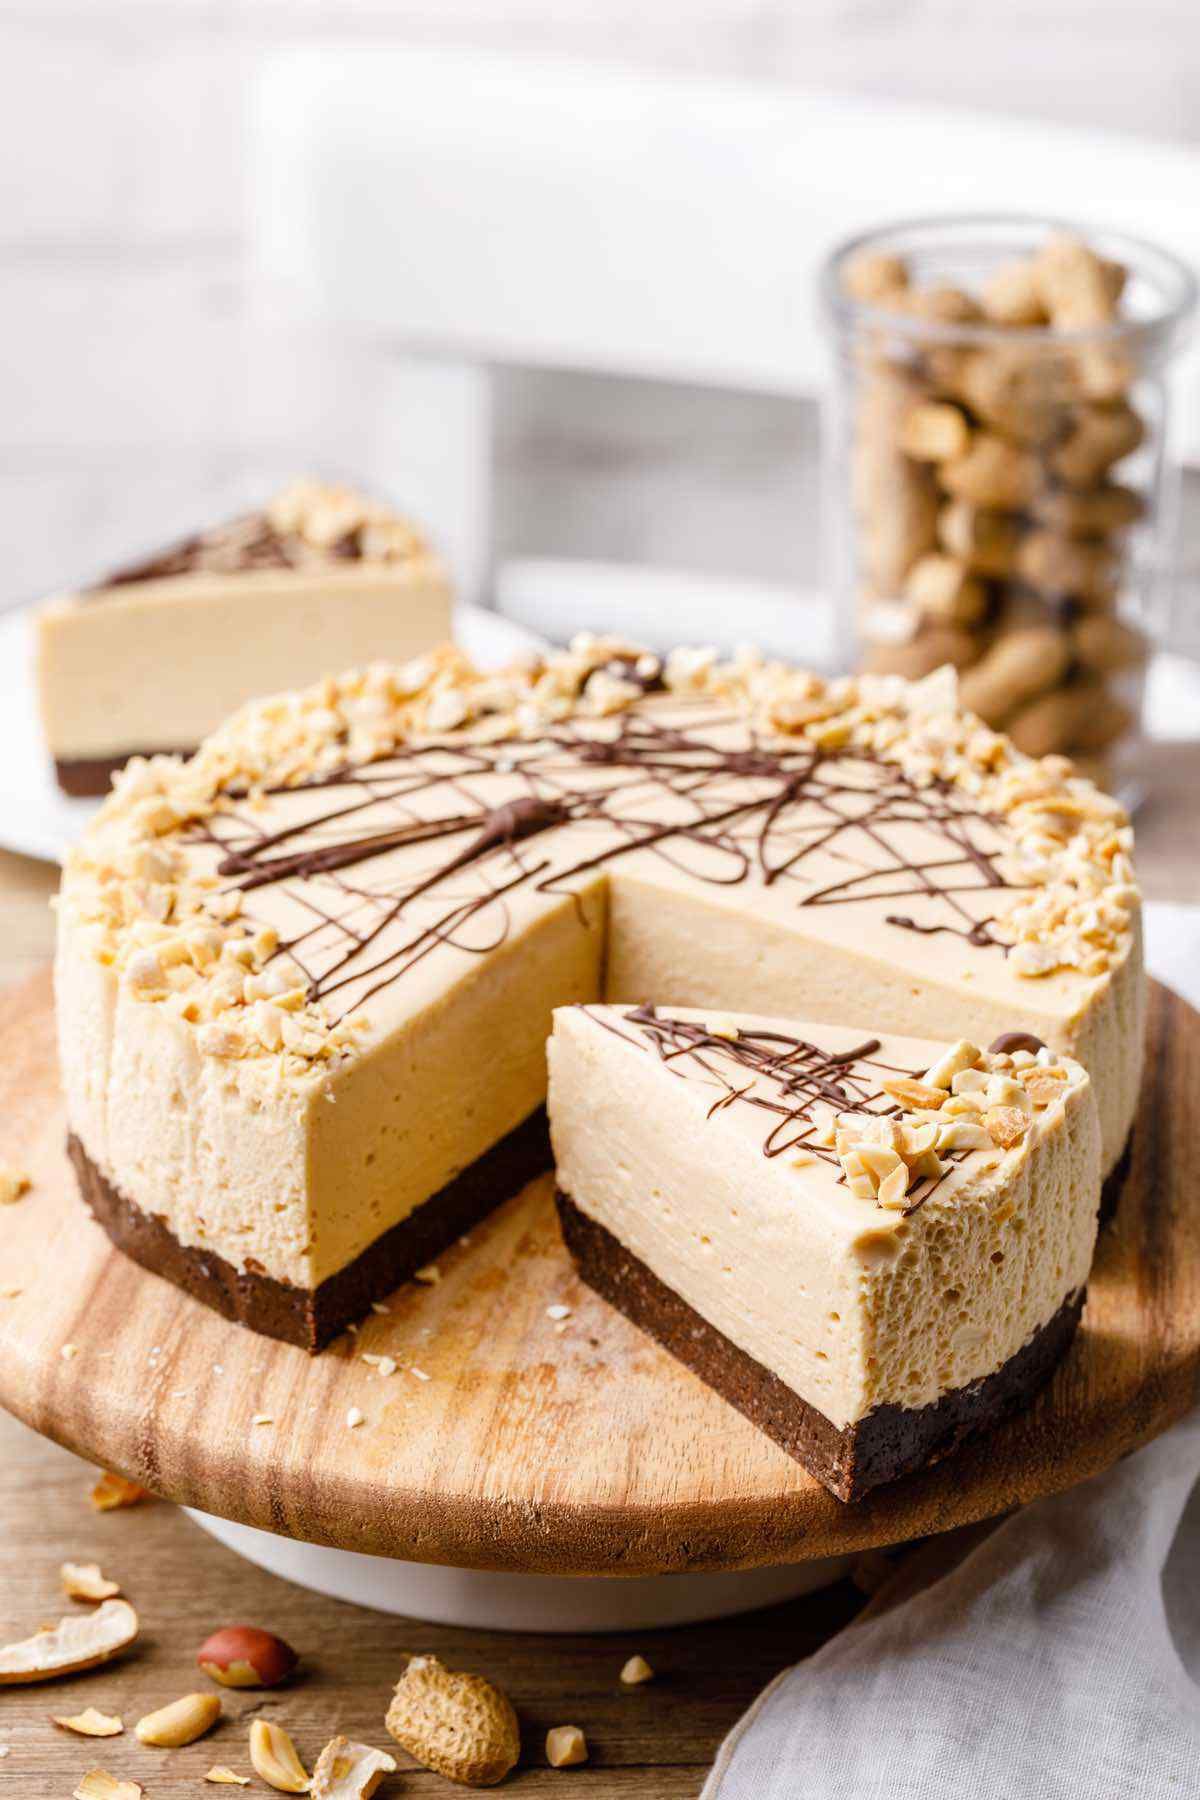 On a wooden lazy Susan is a cheesecake with a dark chocolate base and caramel colored filling. One slice has been cut out. There are peanuts scattered over the table
